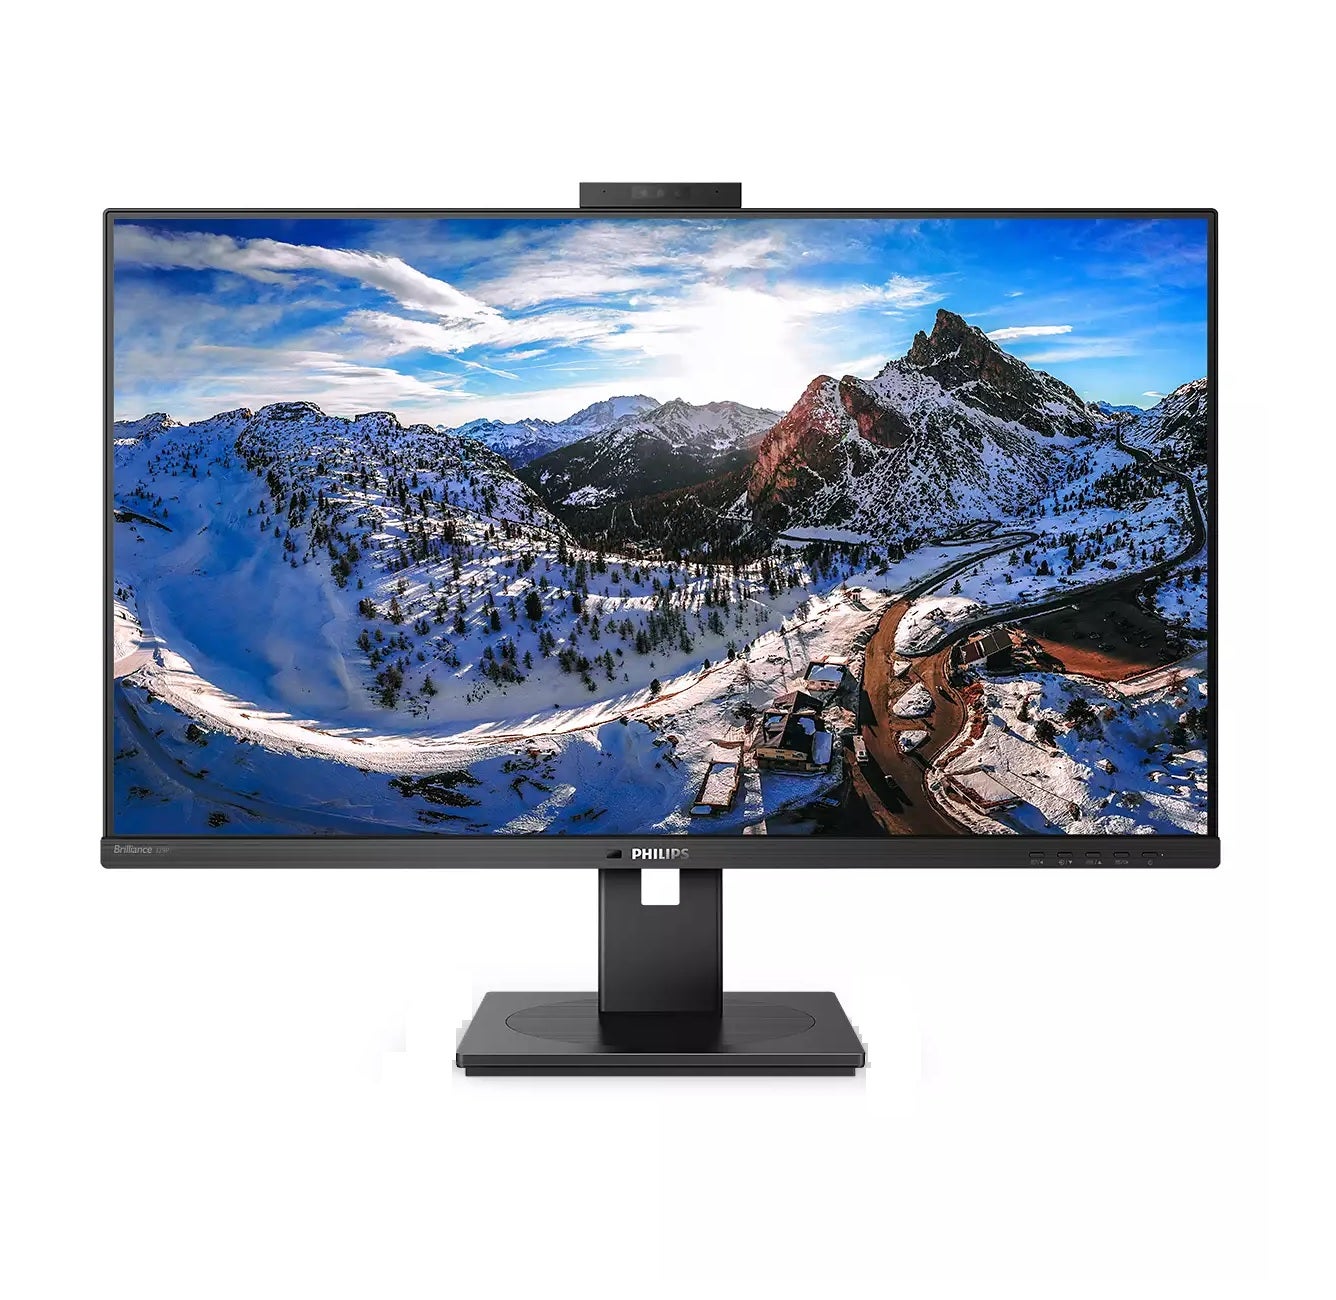 Philips 329P1H 31.5inch WLED LCD Monitor